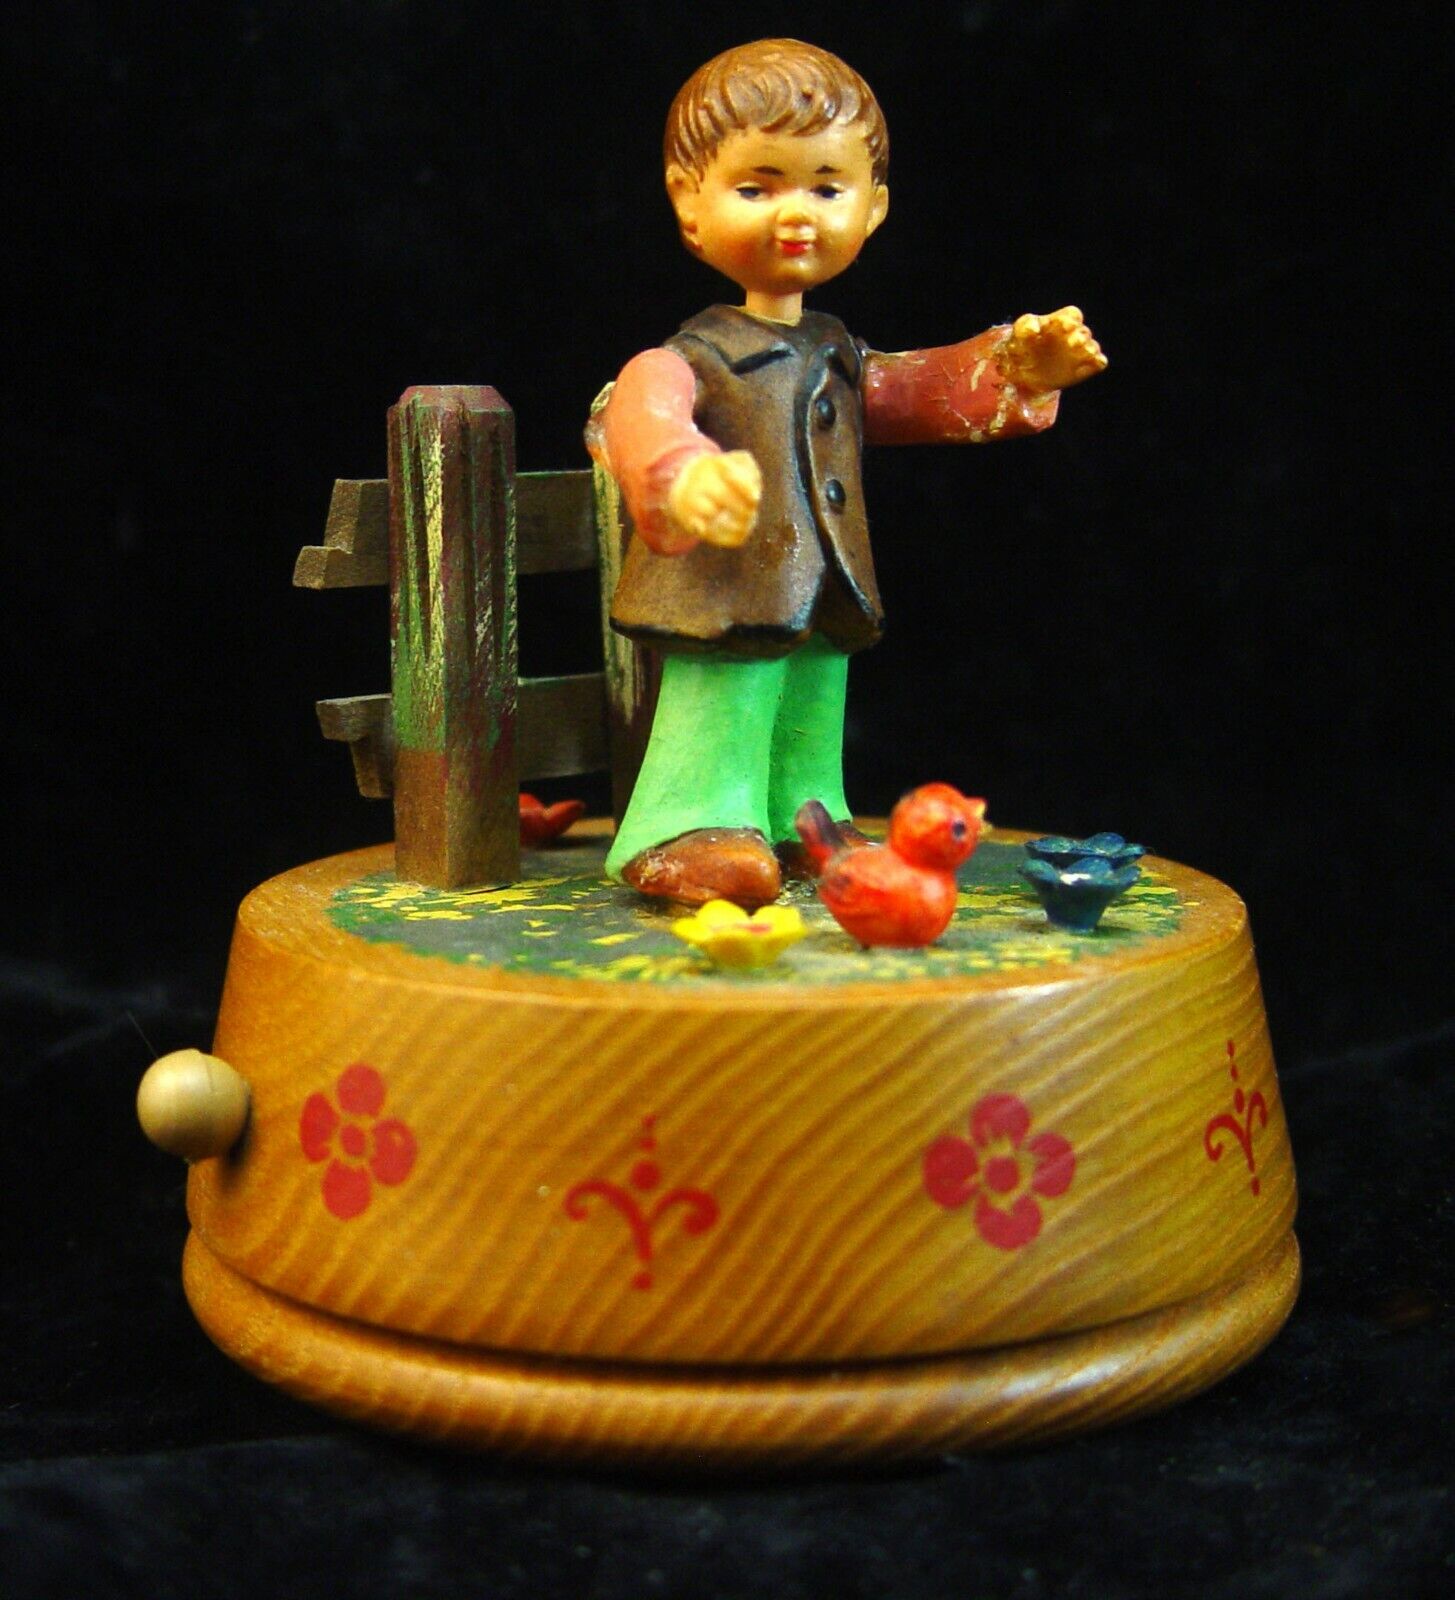 VINTAGE ANRI CARVED WOOD BOY - CARDINAL RED BIRD MUSIC BOX PLAYS AS TIME GOES BY